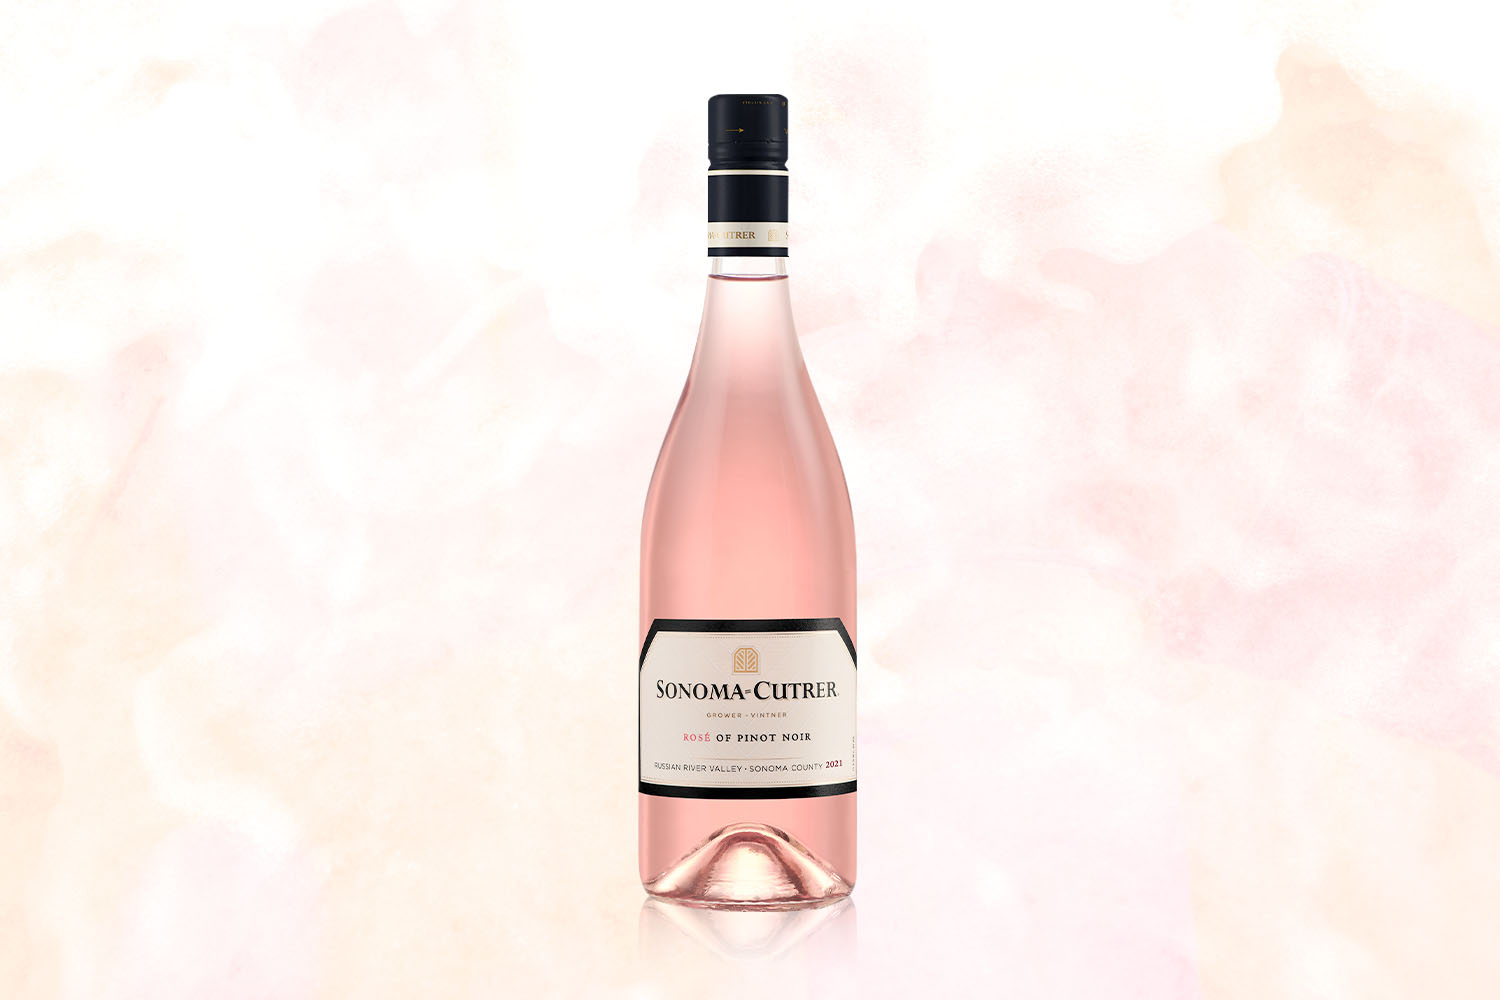 A bottle of Sonoma Cutrer Rosé on a pale pink background